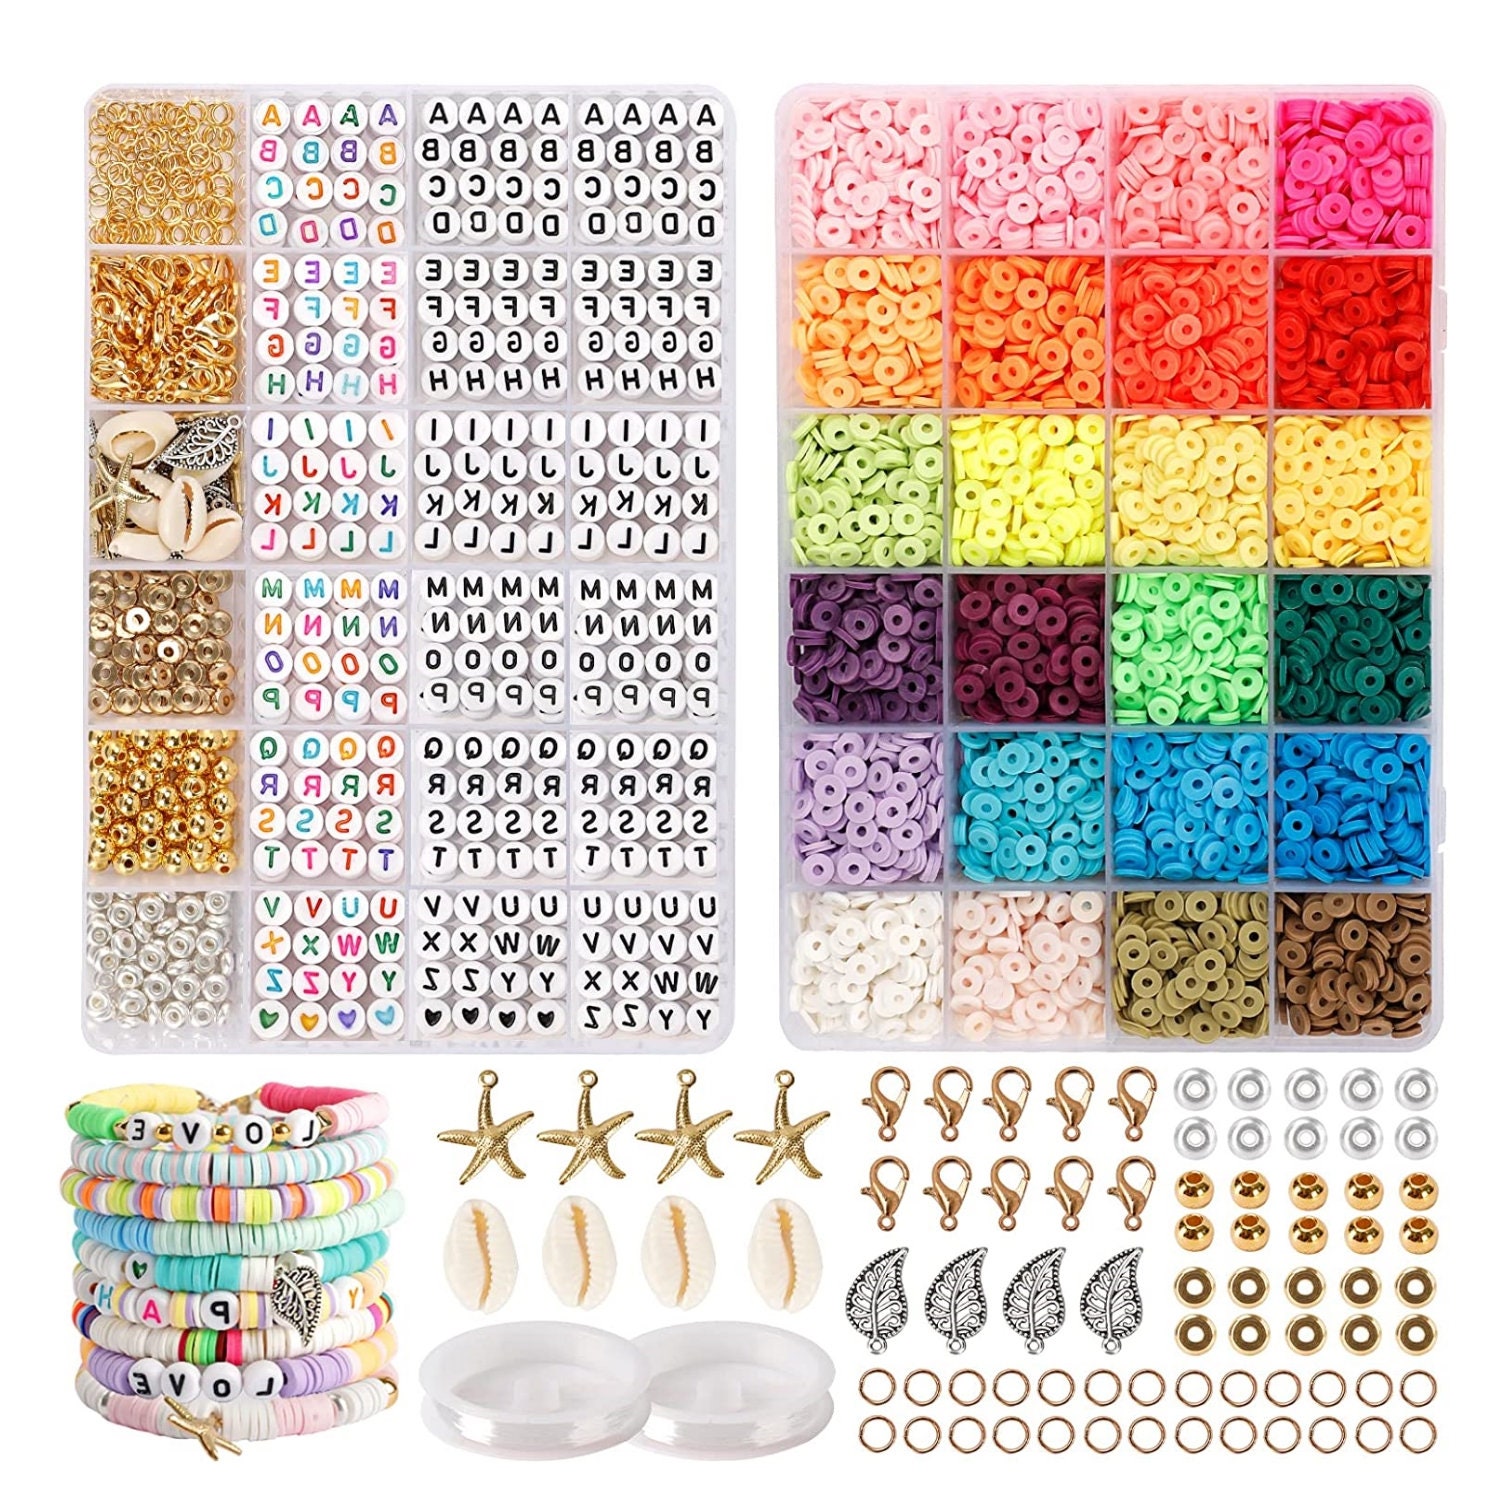 Generic 4mm Beads For Bracelets Kit DIY Jewelry Bracelets Making And Crafts  @ Best Price Online